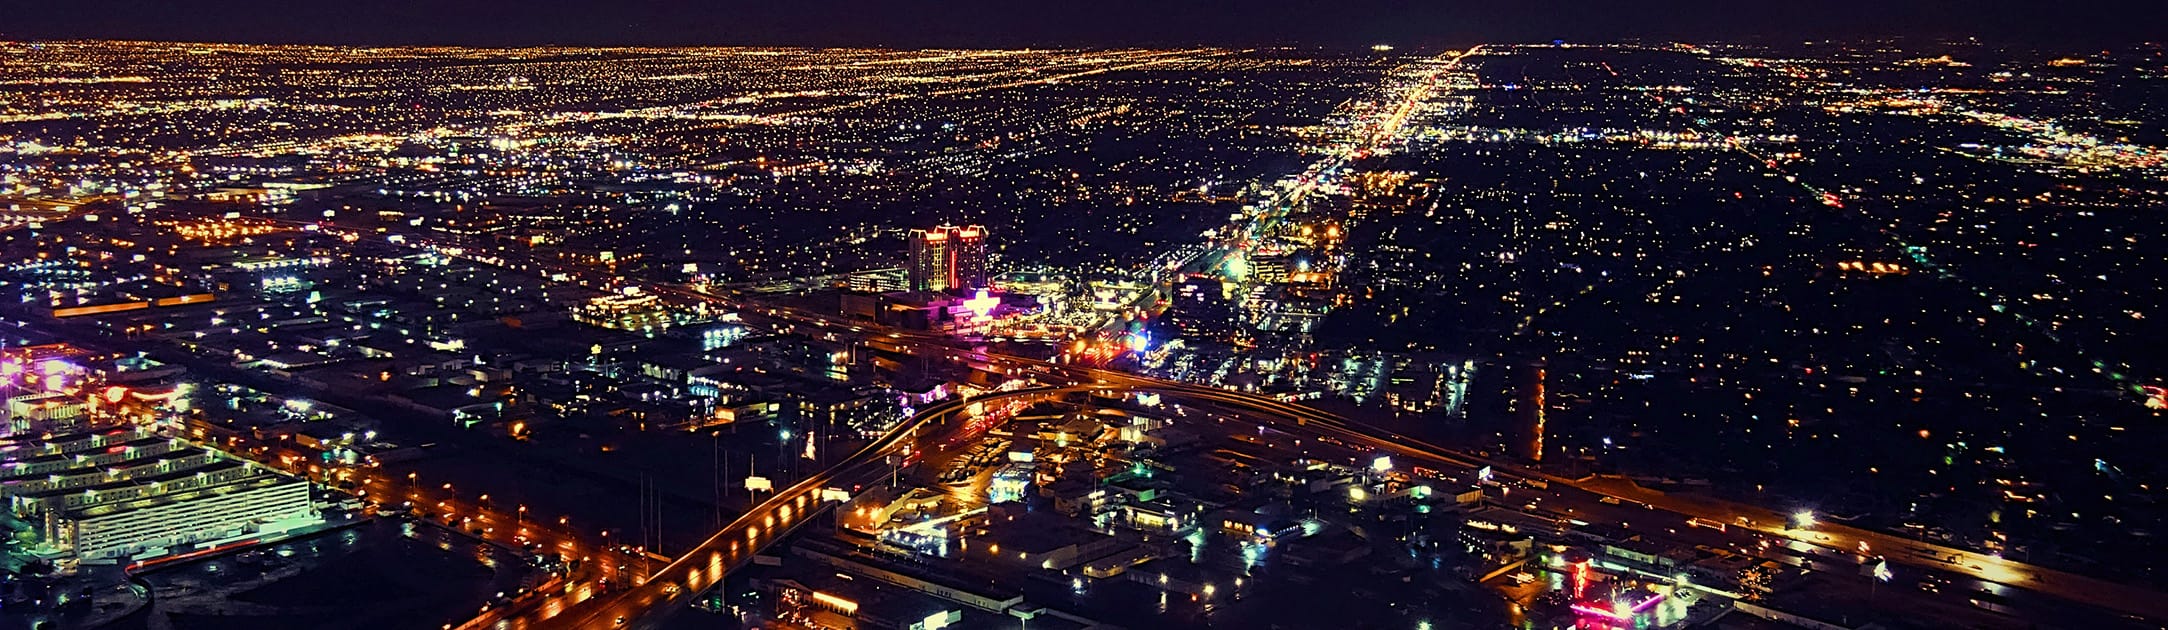 Night time high aerial view of neighborhood. Main streets and freeways have lots of lights and homes with lights on.